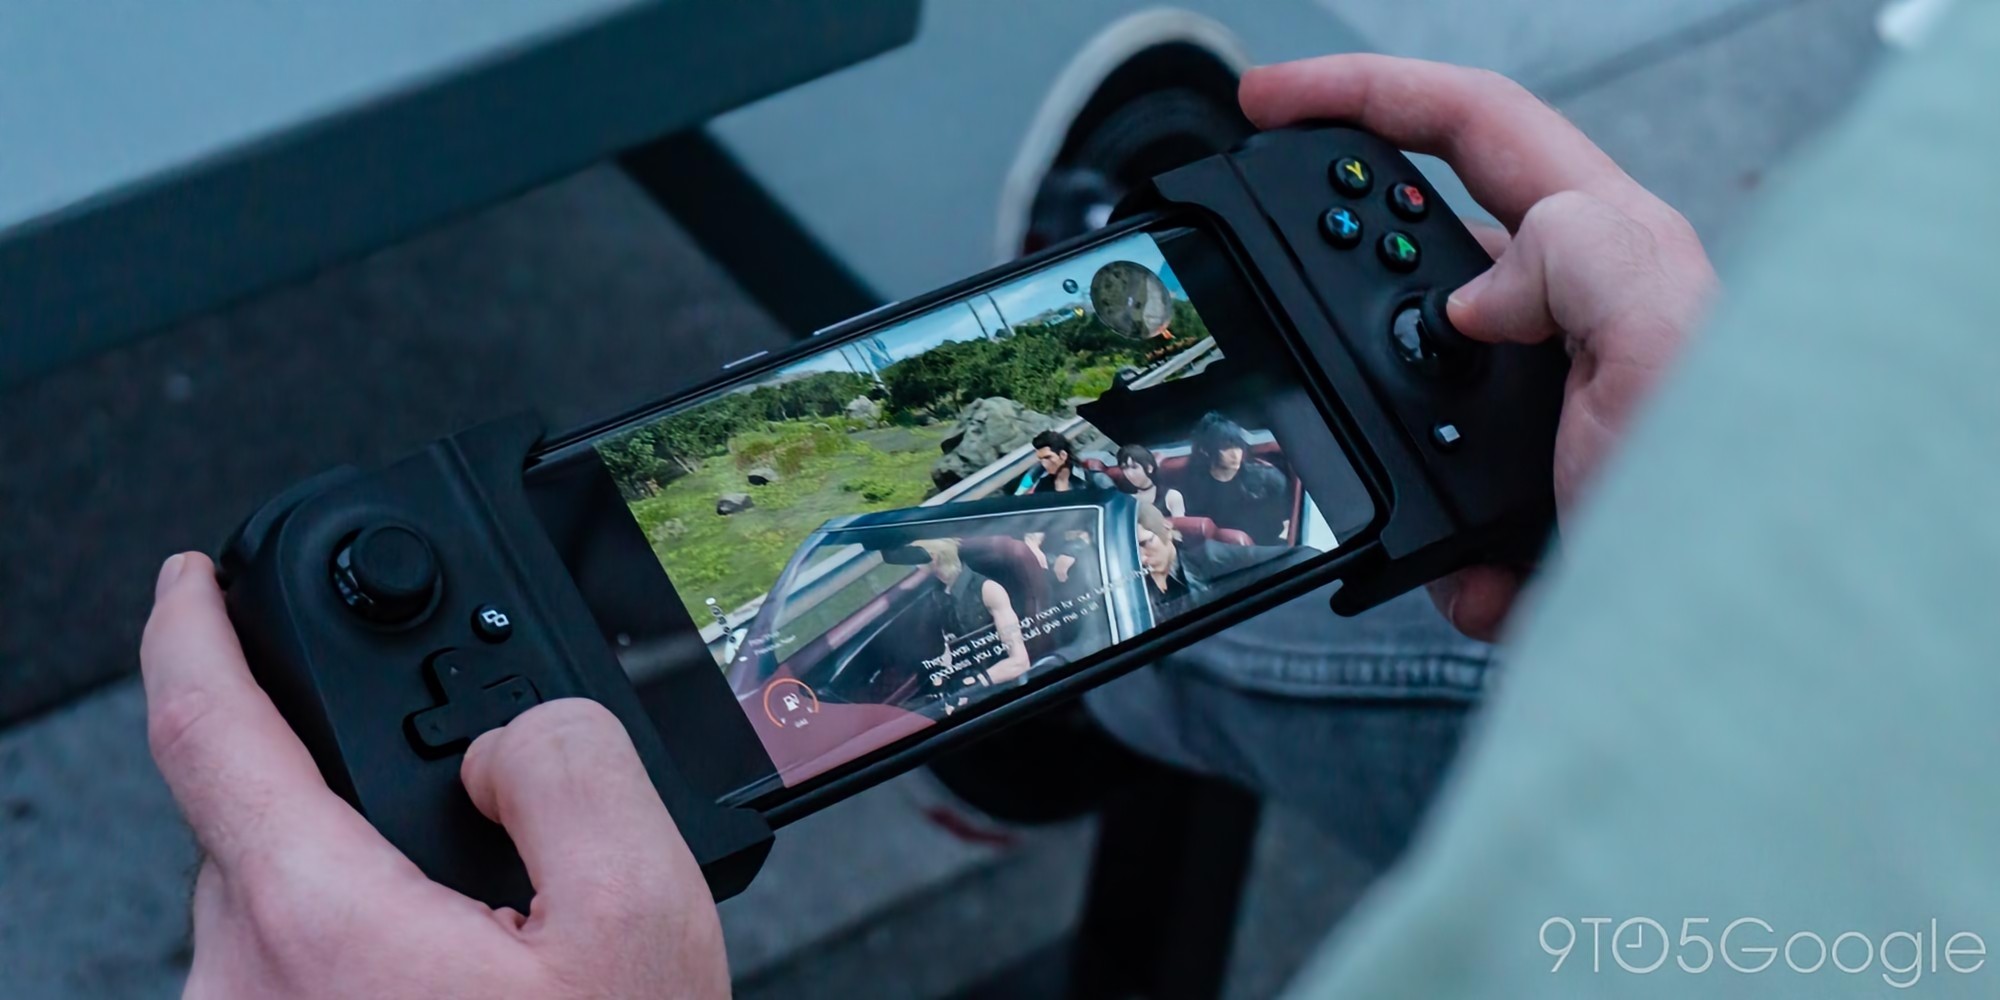 Call of Duty Mobile re-adds controller support on Android/iOS - 9to5Google